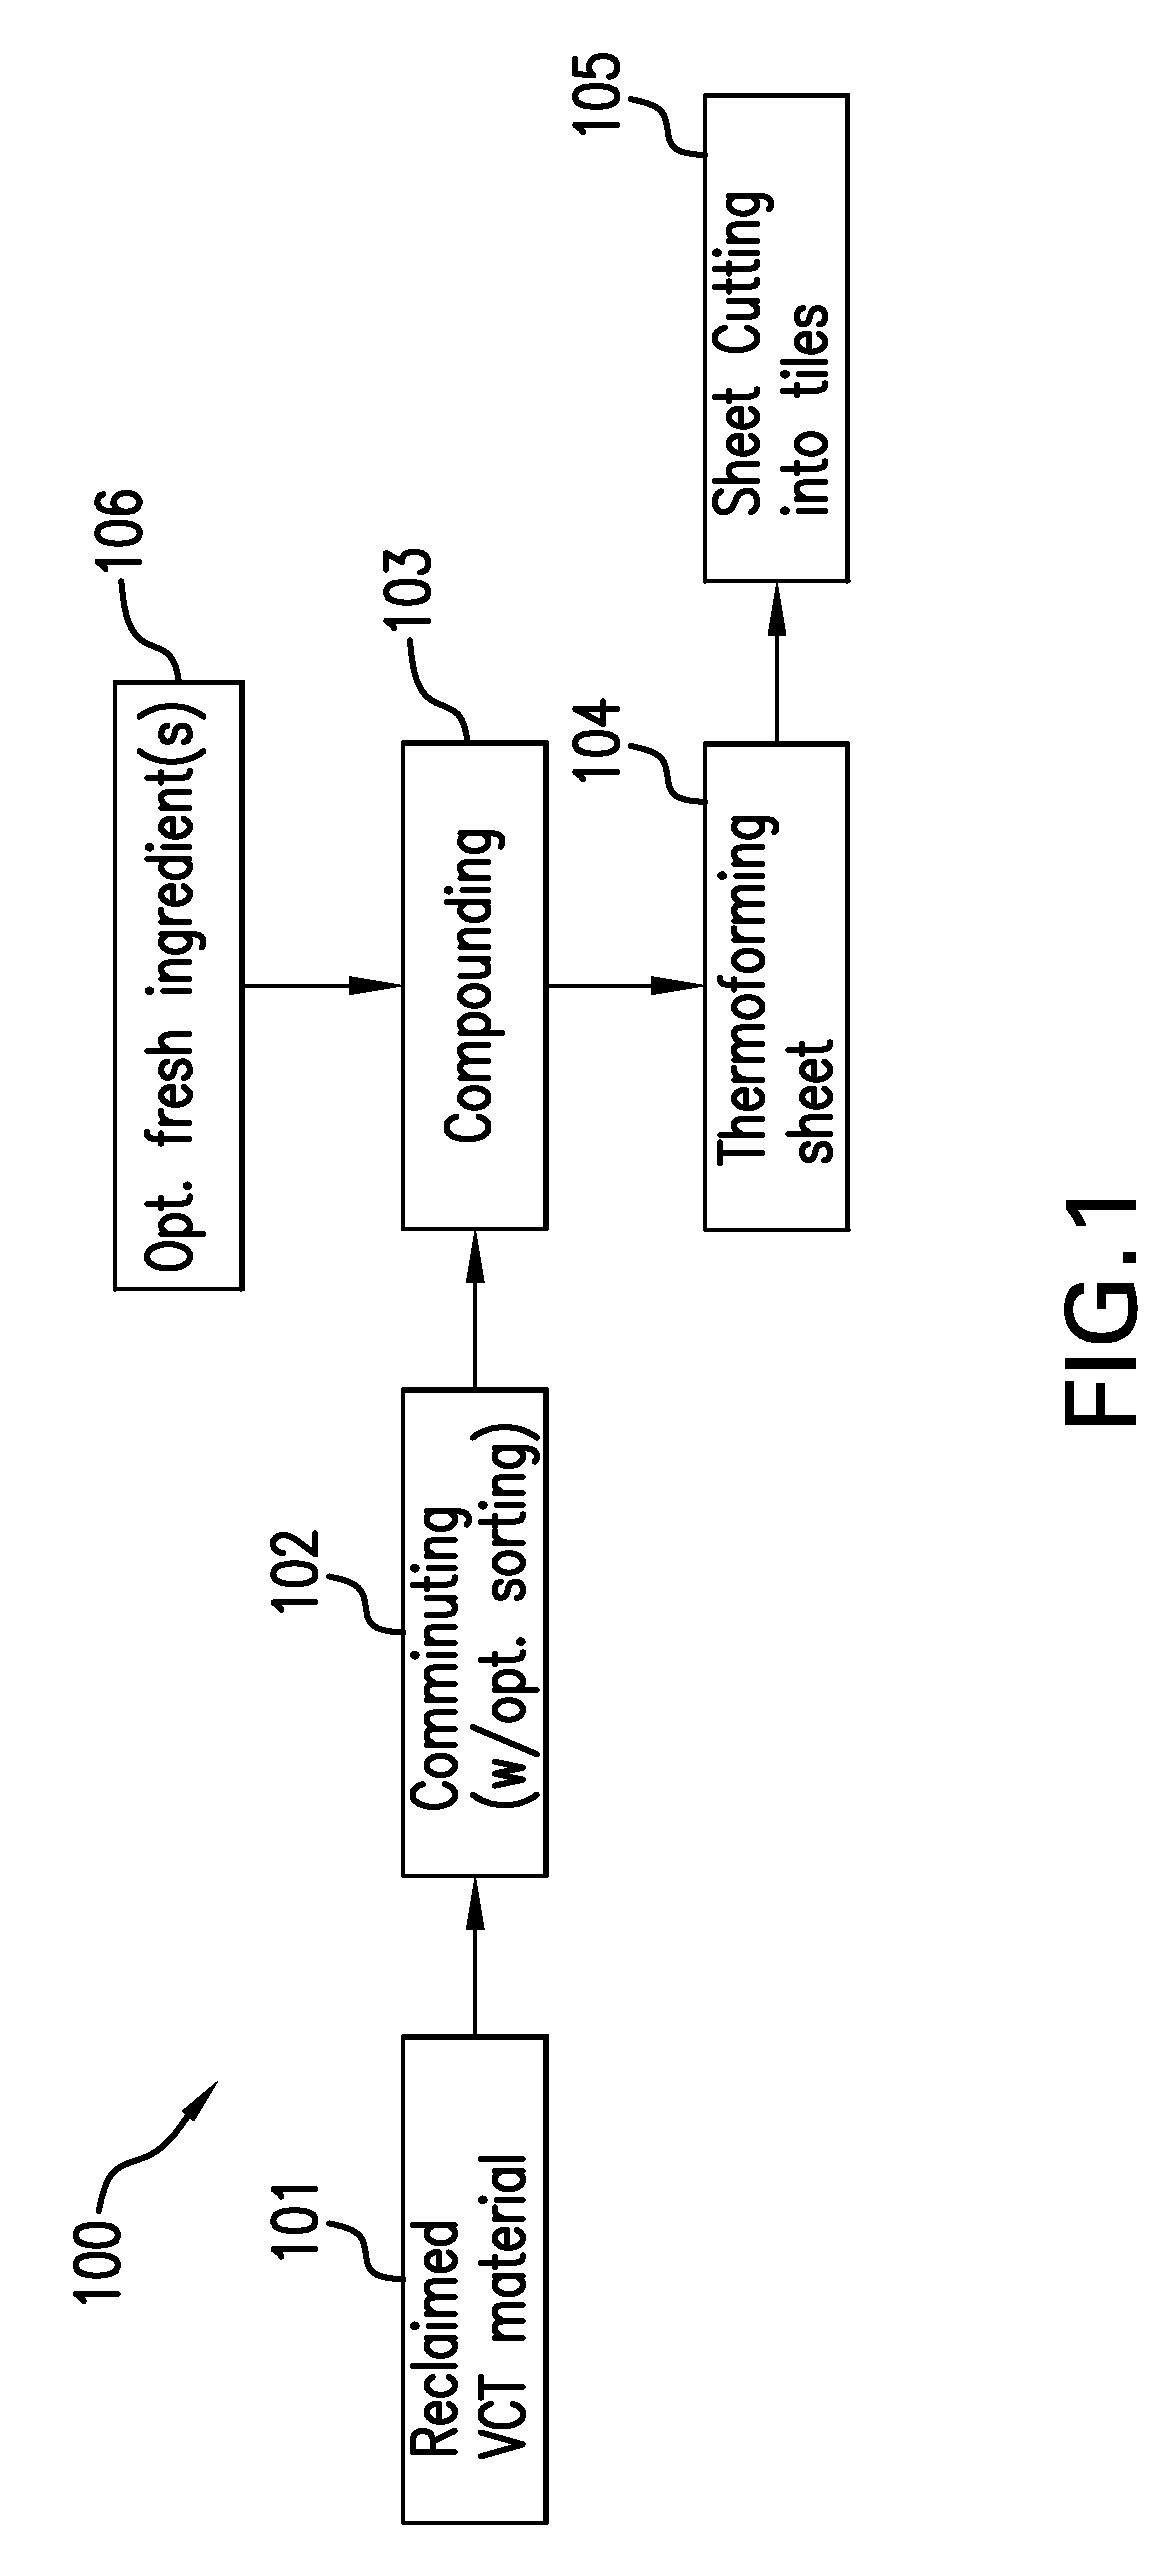 Surface Coverings Containing Reclaimed VCT Material, and Methods and Systems For Making and Using Them